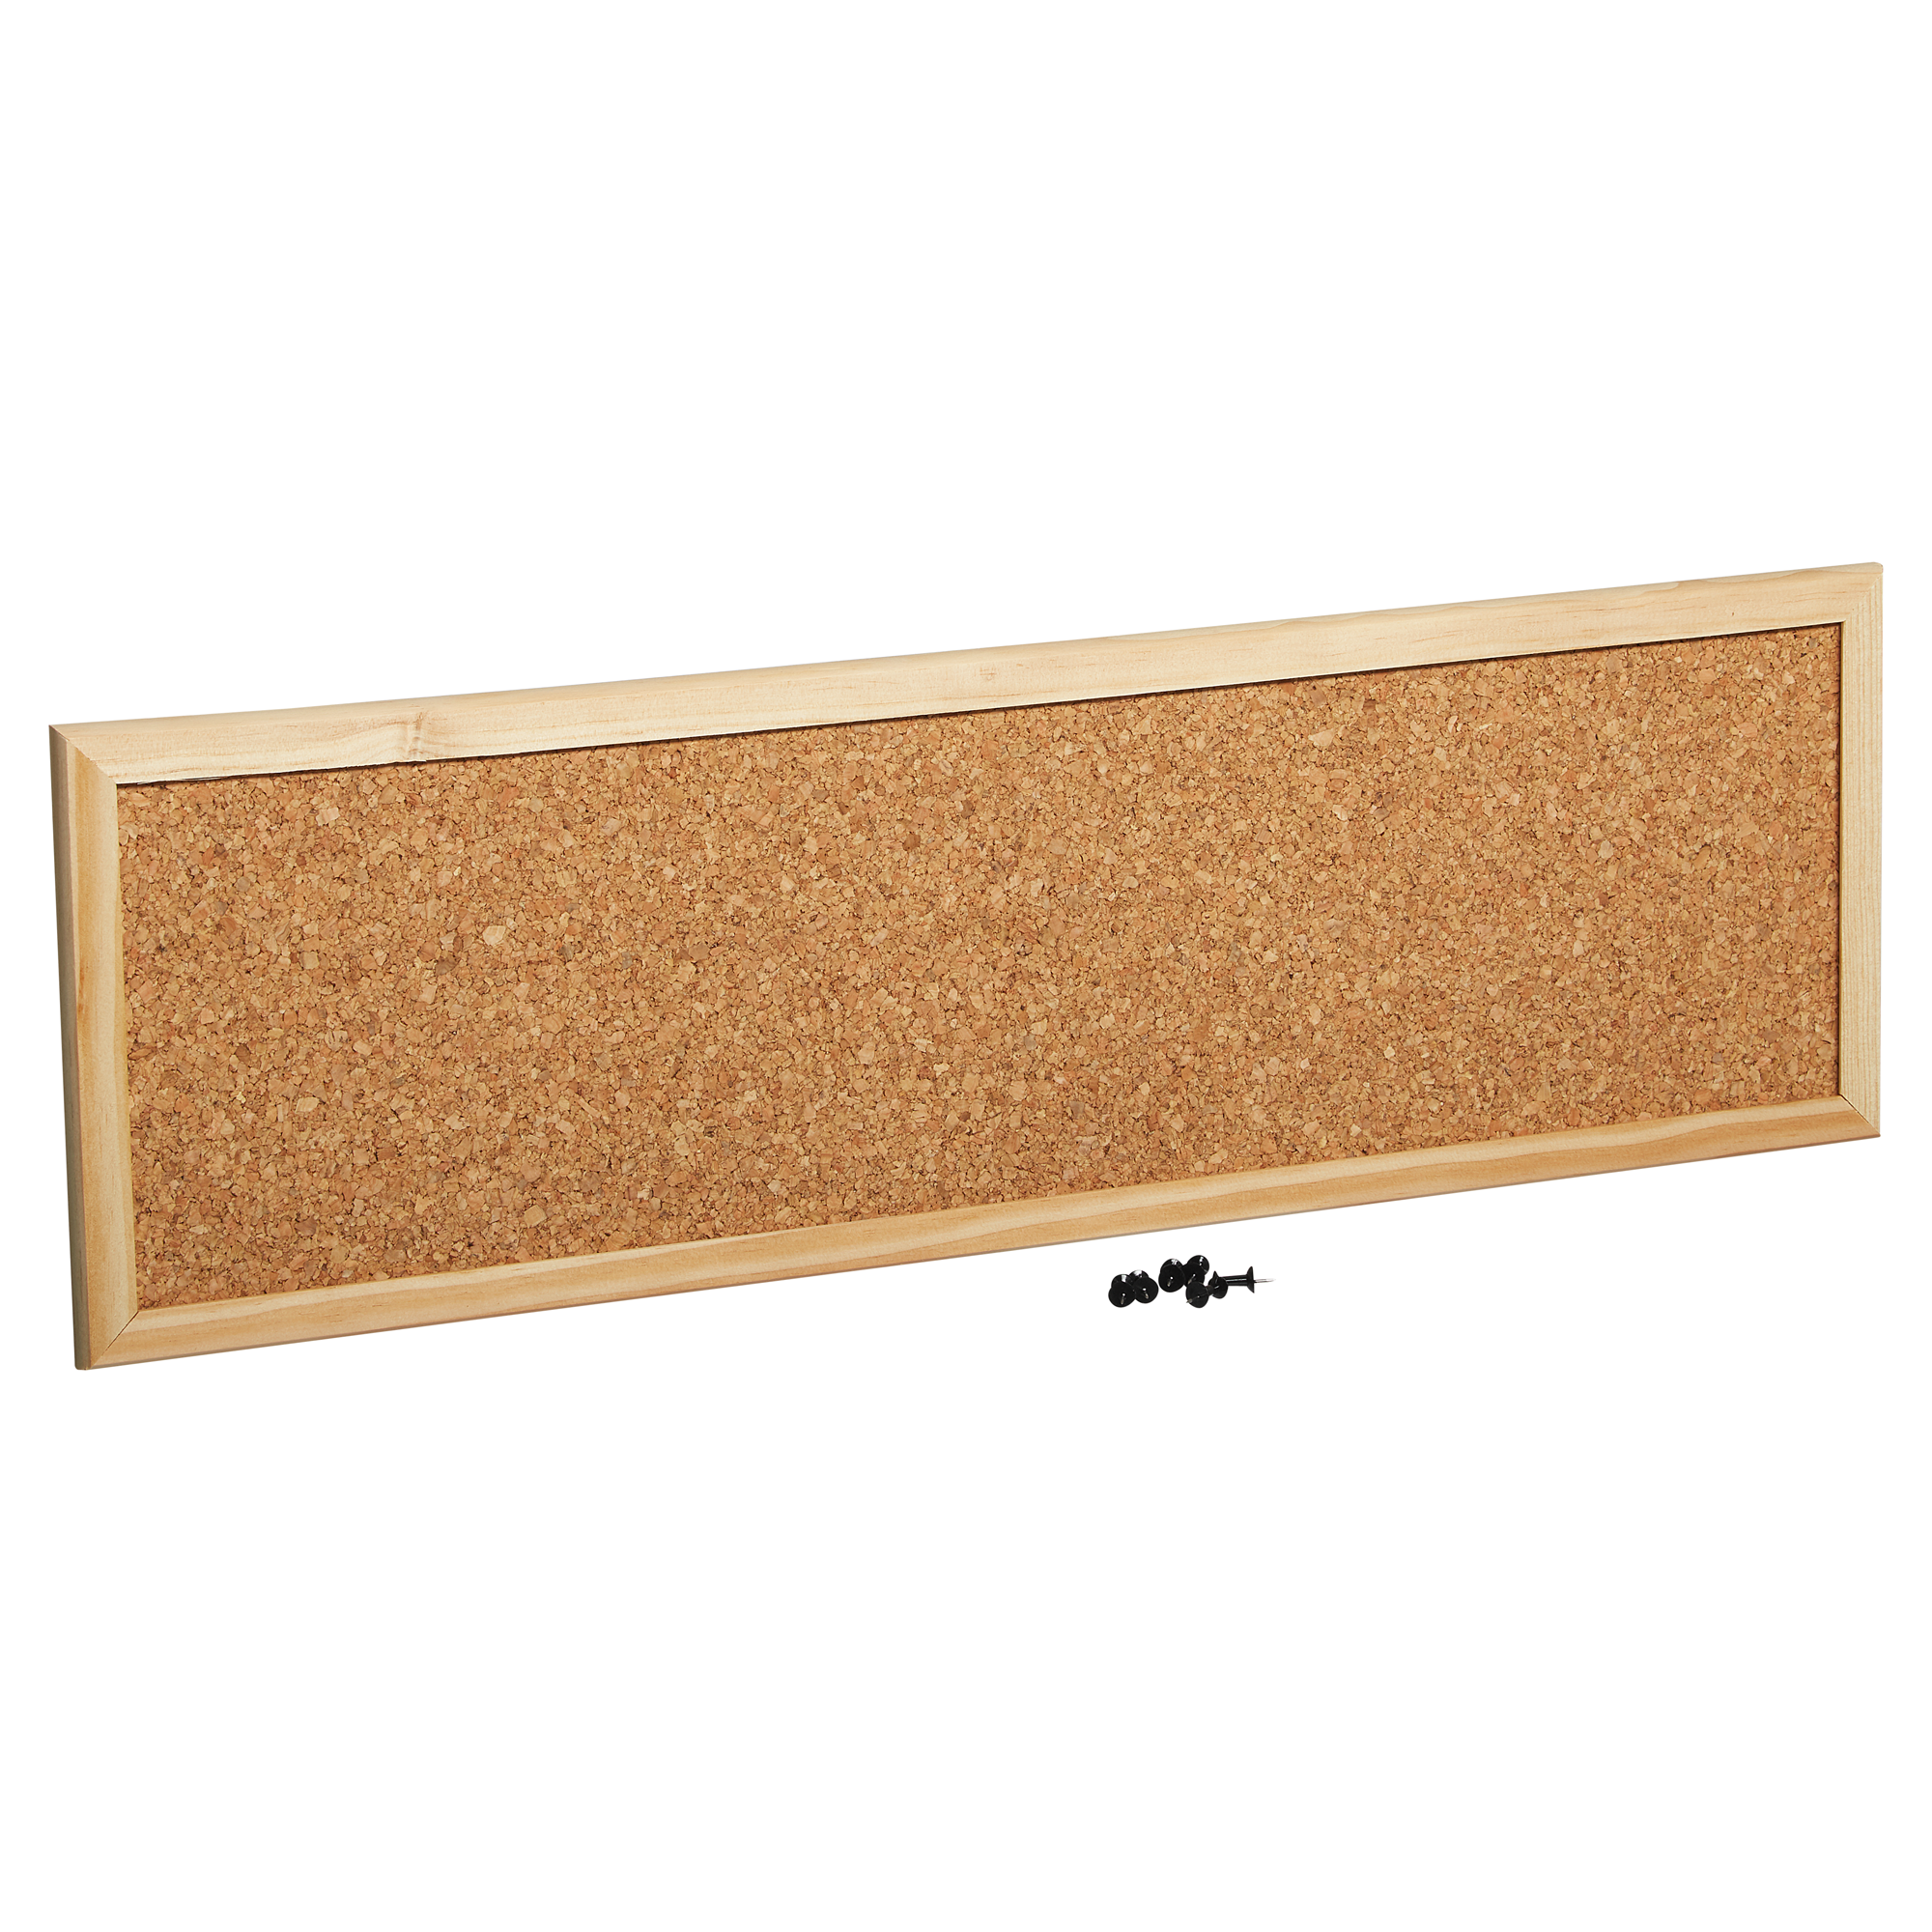 Pinnwand Holz Kork 60 x 20 cm + product picture